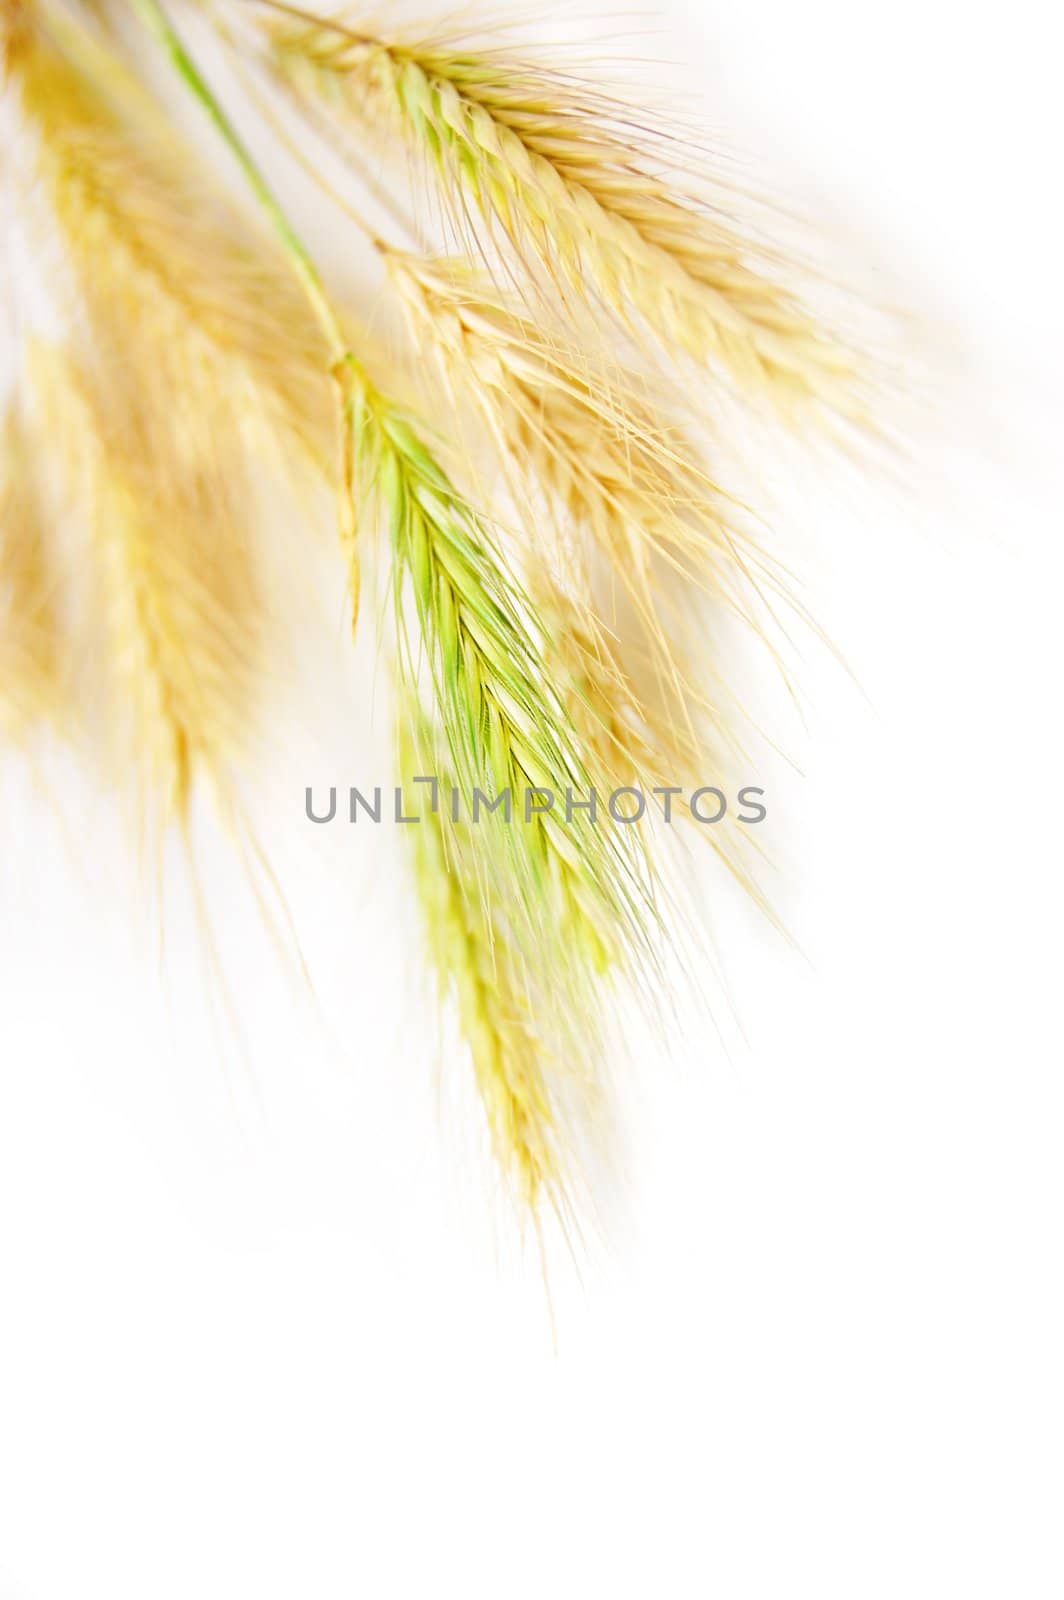 Wheat by Angel_a